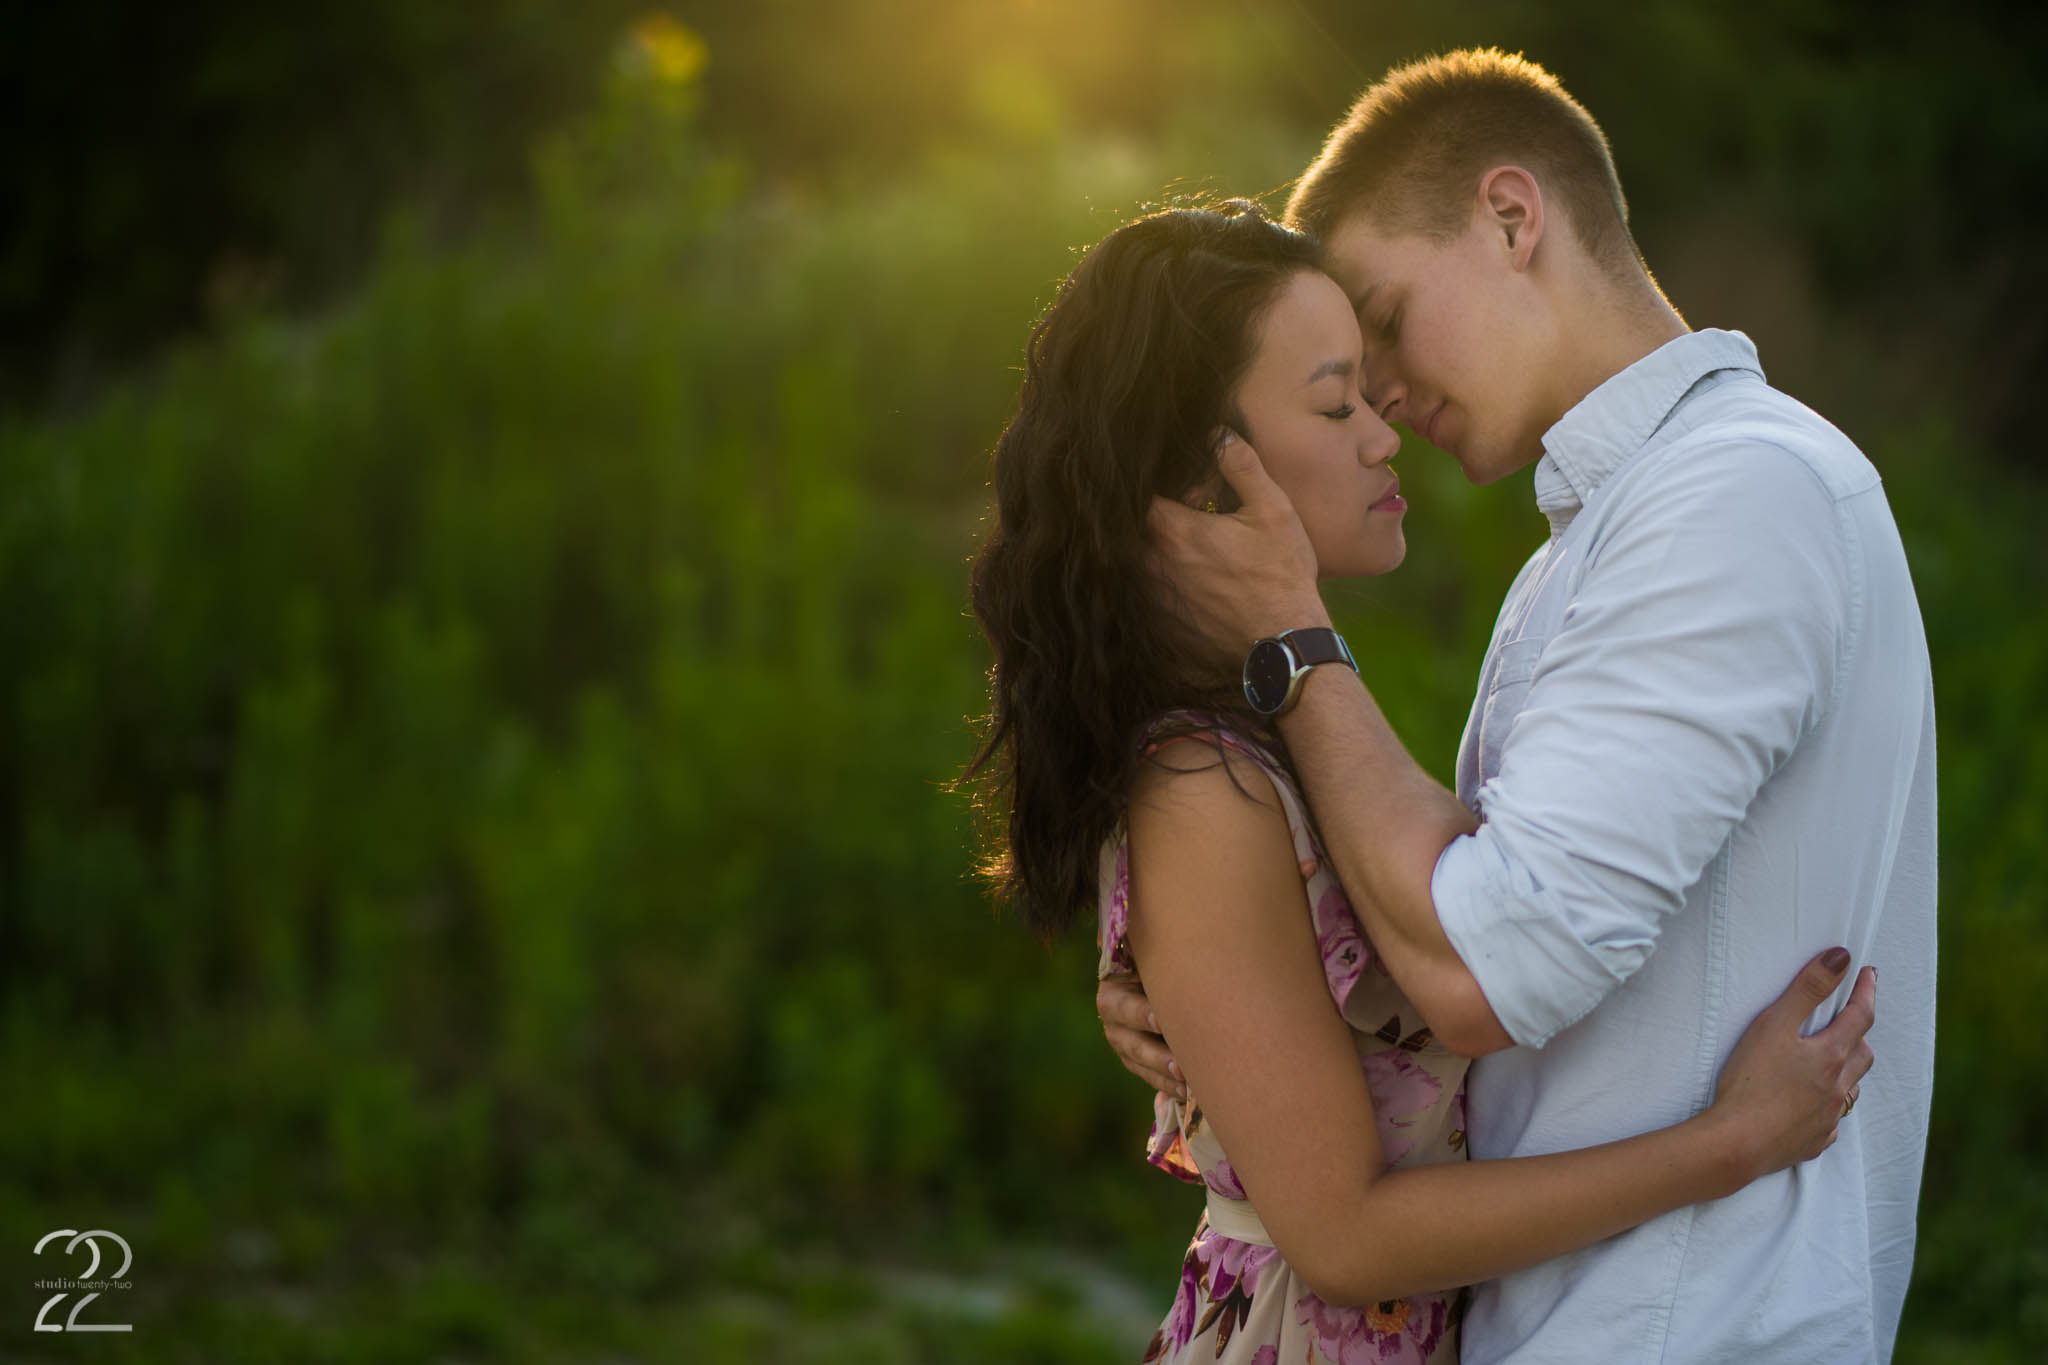 Man brings woman in for a kiss as the sun sets at Oakes Quarry Park by Dayton Wedding Photographer Studio 22 Photography